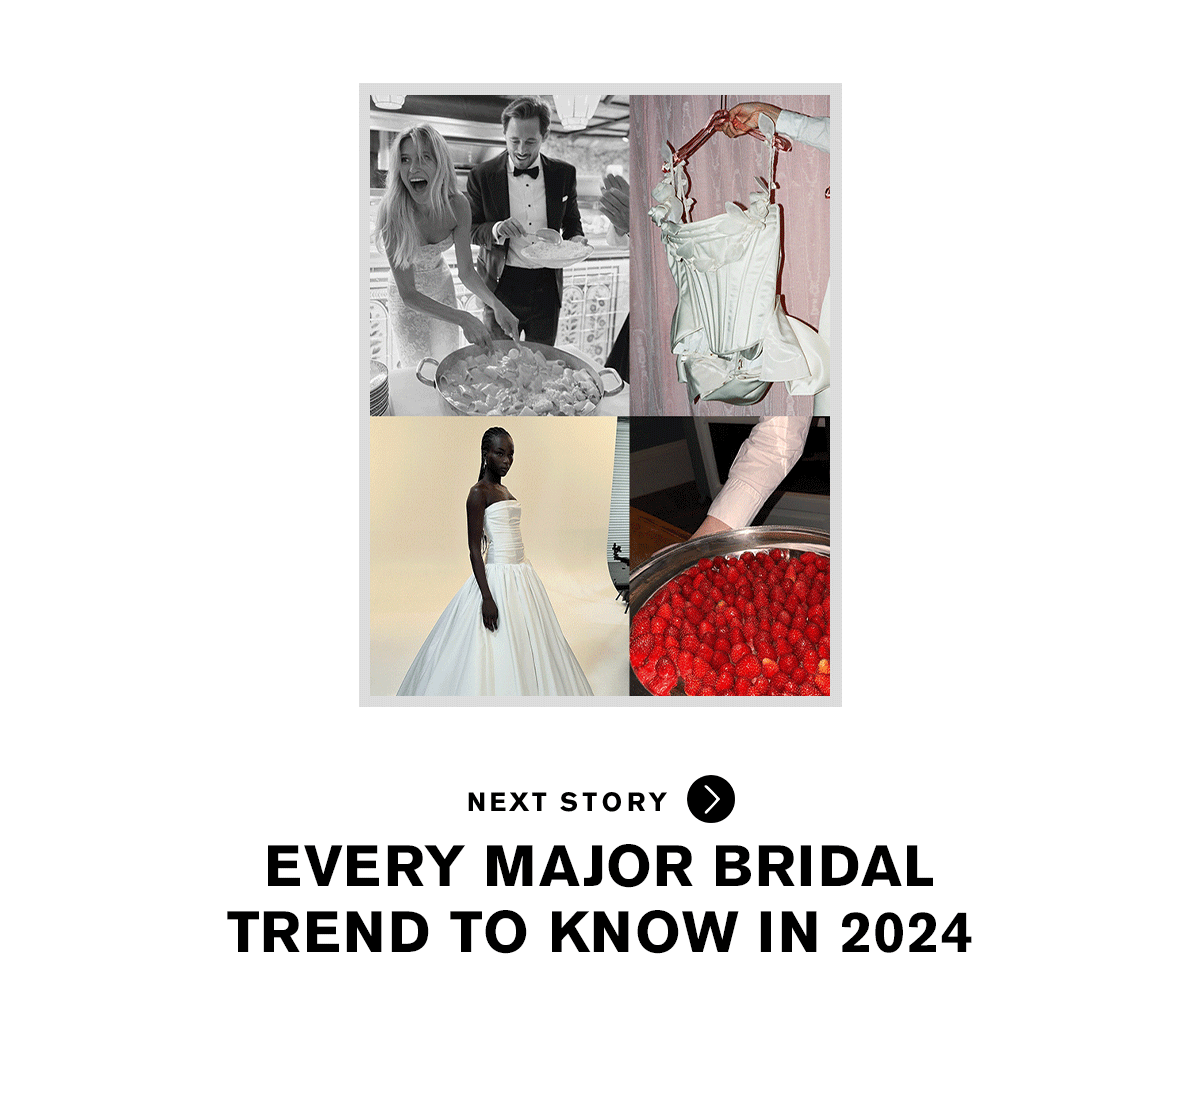 Every Major Bridal Trend to Know in 2024